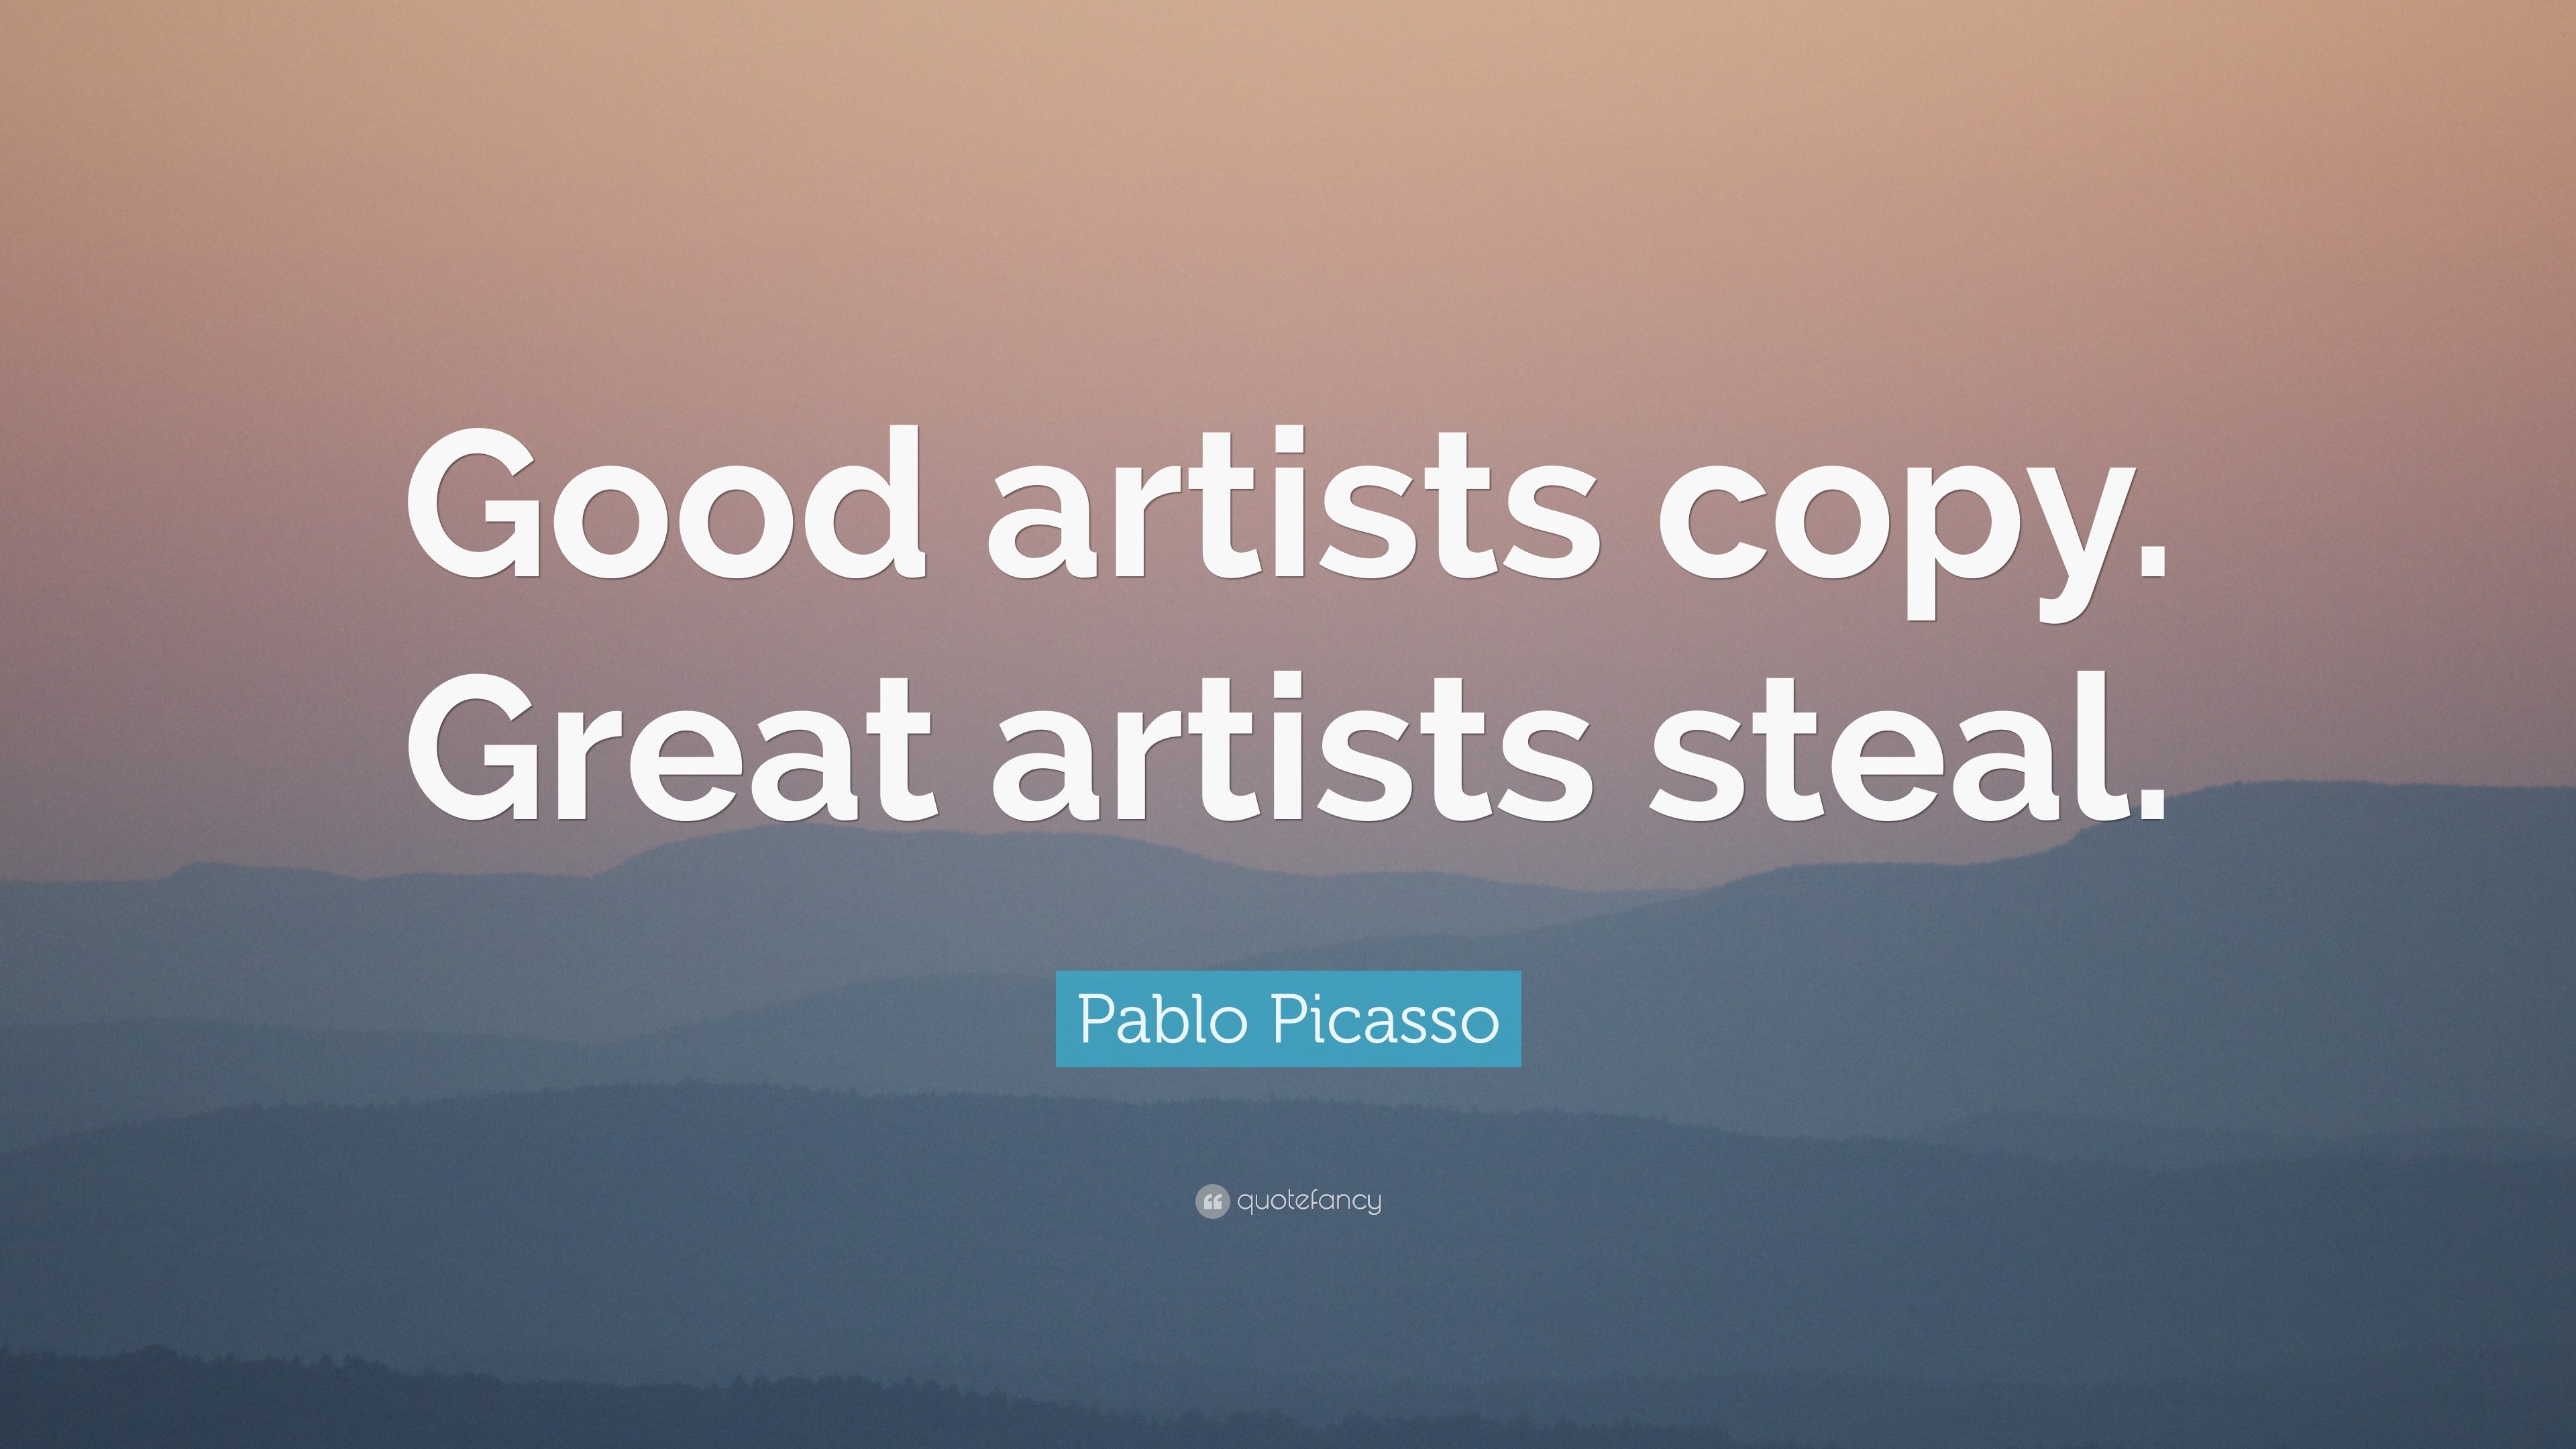 Pablo Picasso Quote “Good artists copy. Great artists